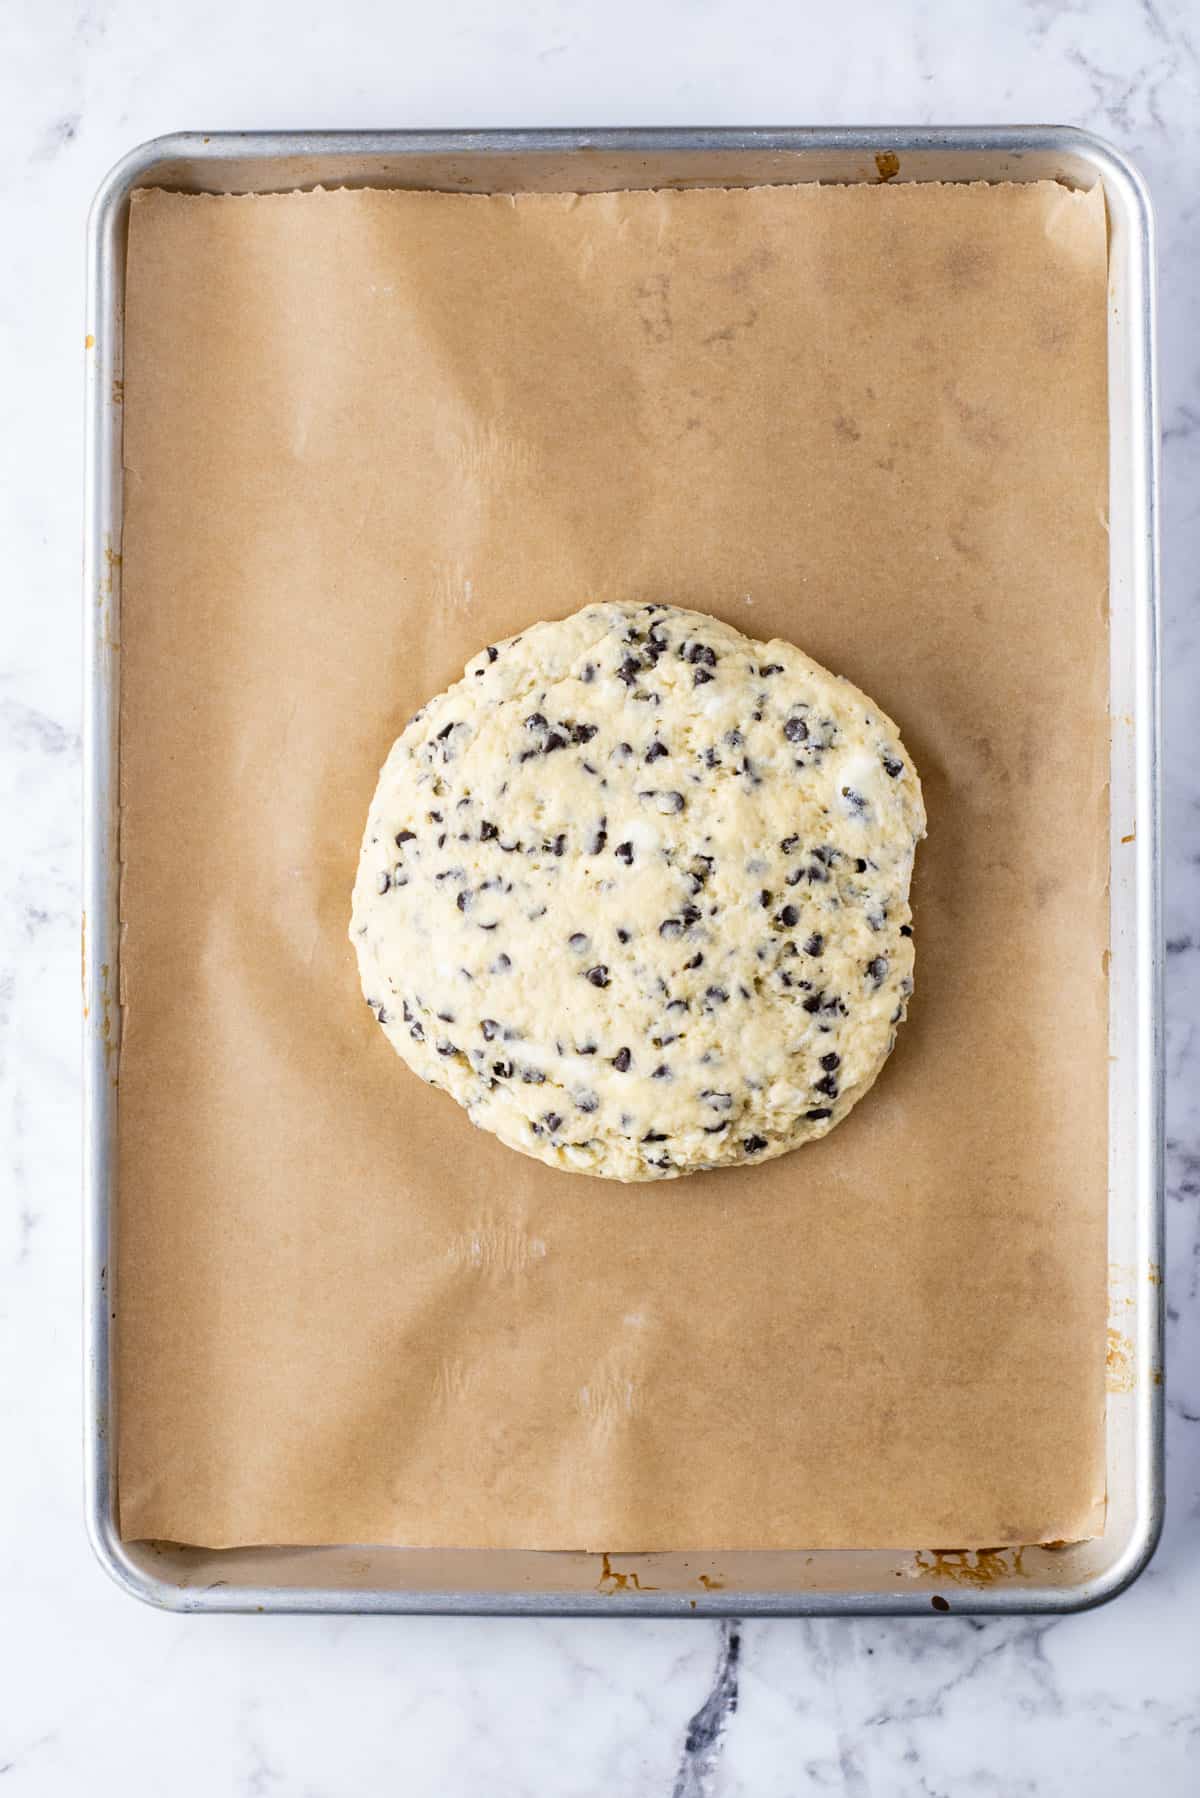 a round disc of chocolate chip scone dough on a baking sheet lined with parchment paper